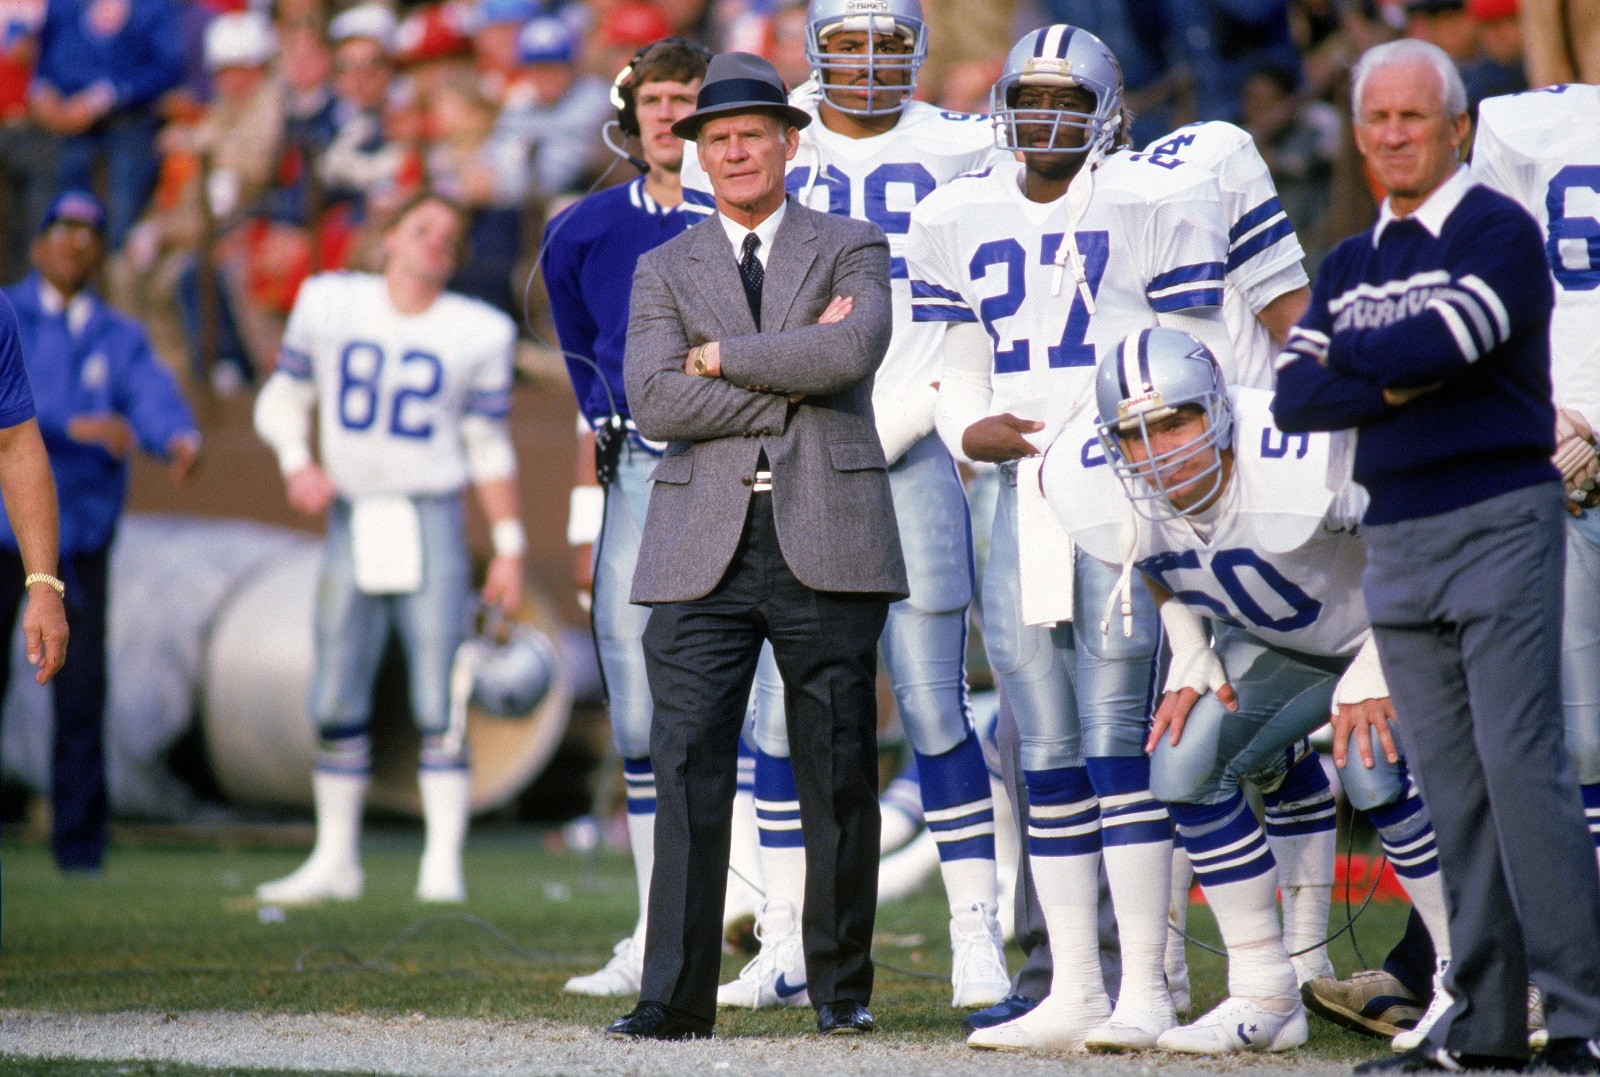 Cowboys Head coach Tom Landry watches the game from the sideline